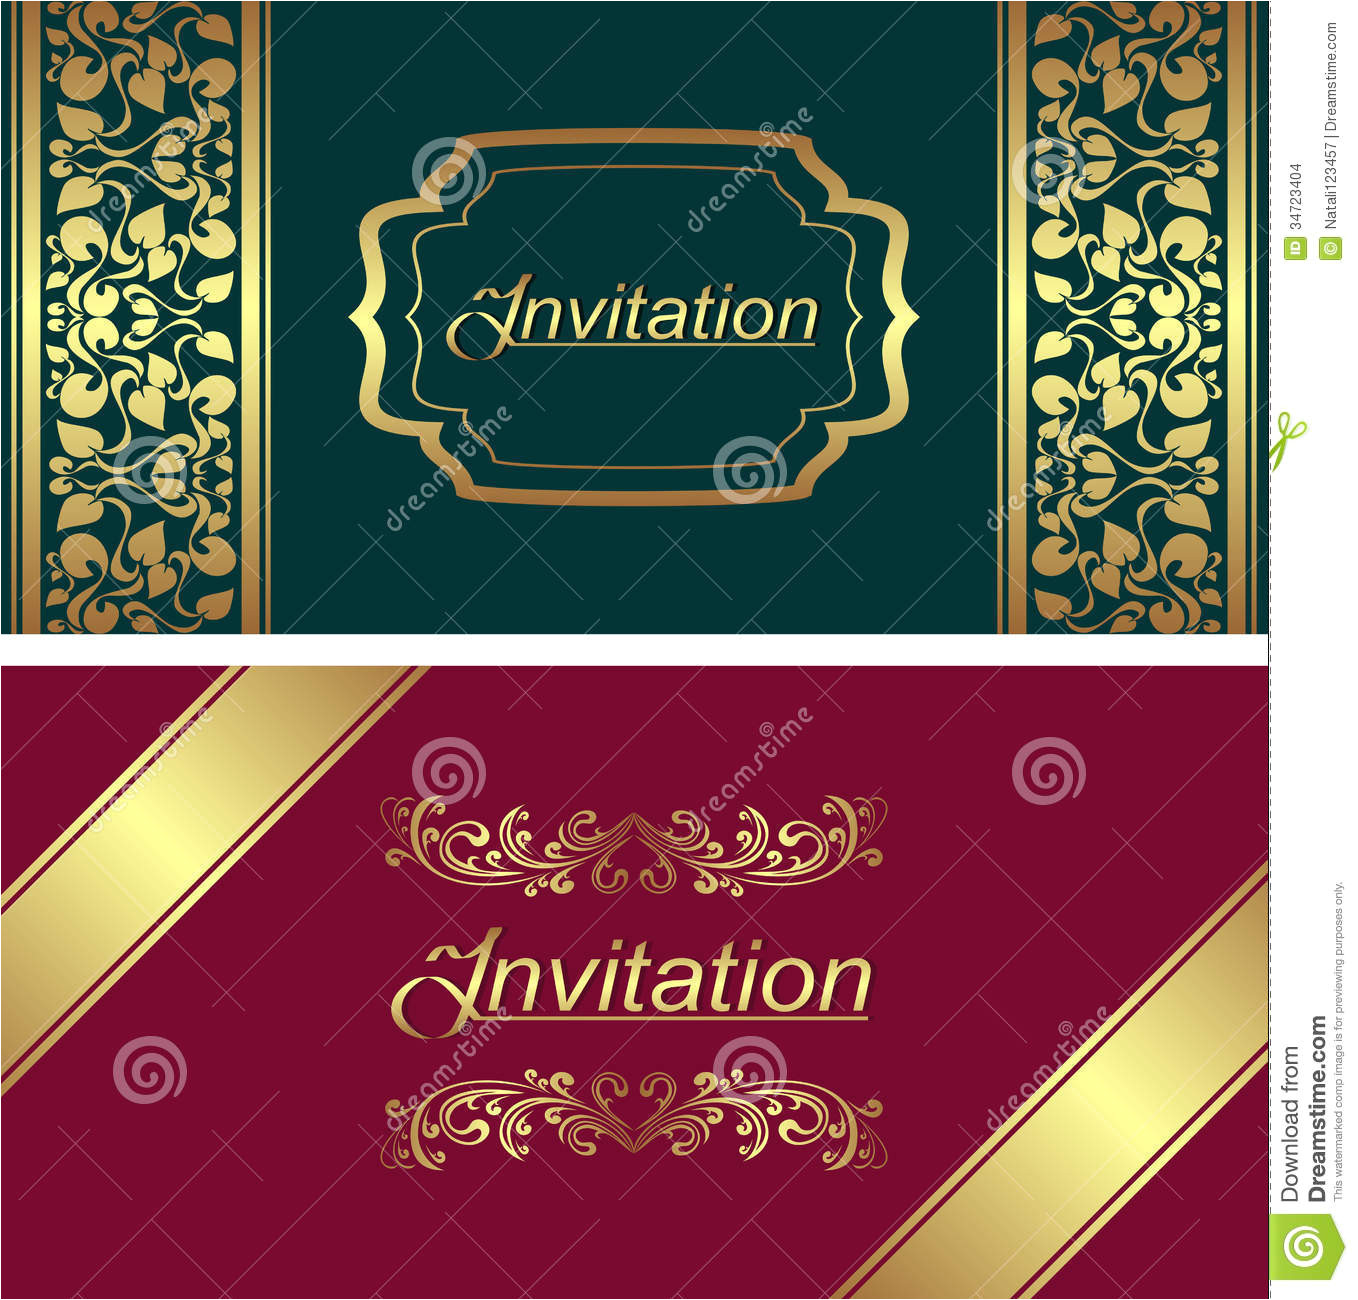 stock images invitation card template presented image34723404